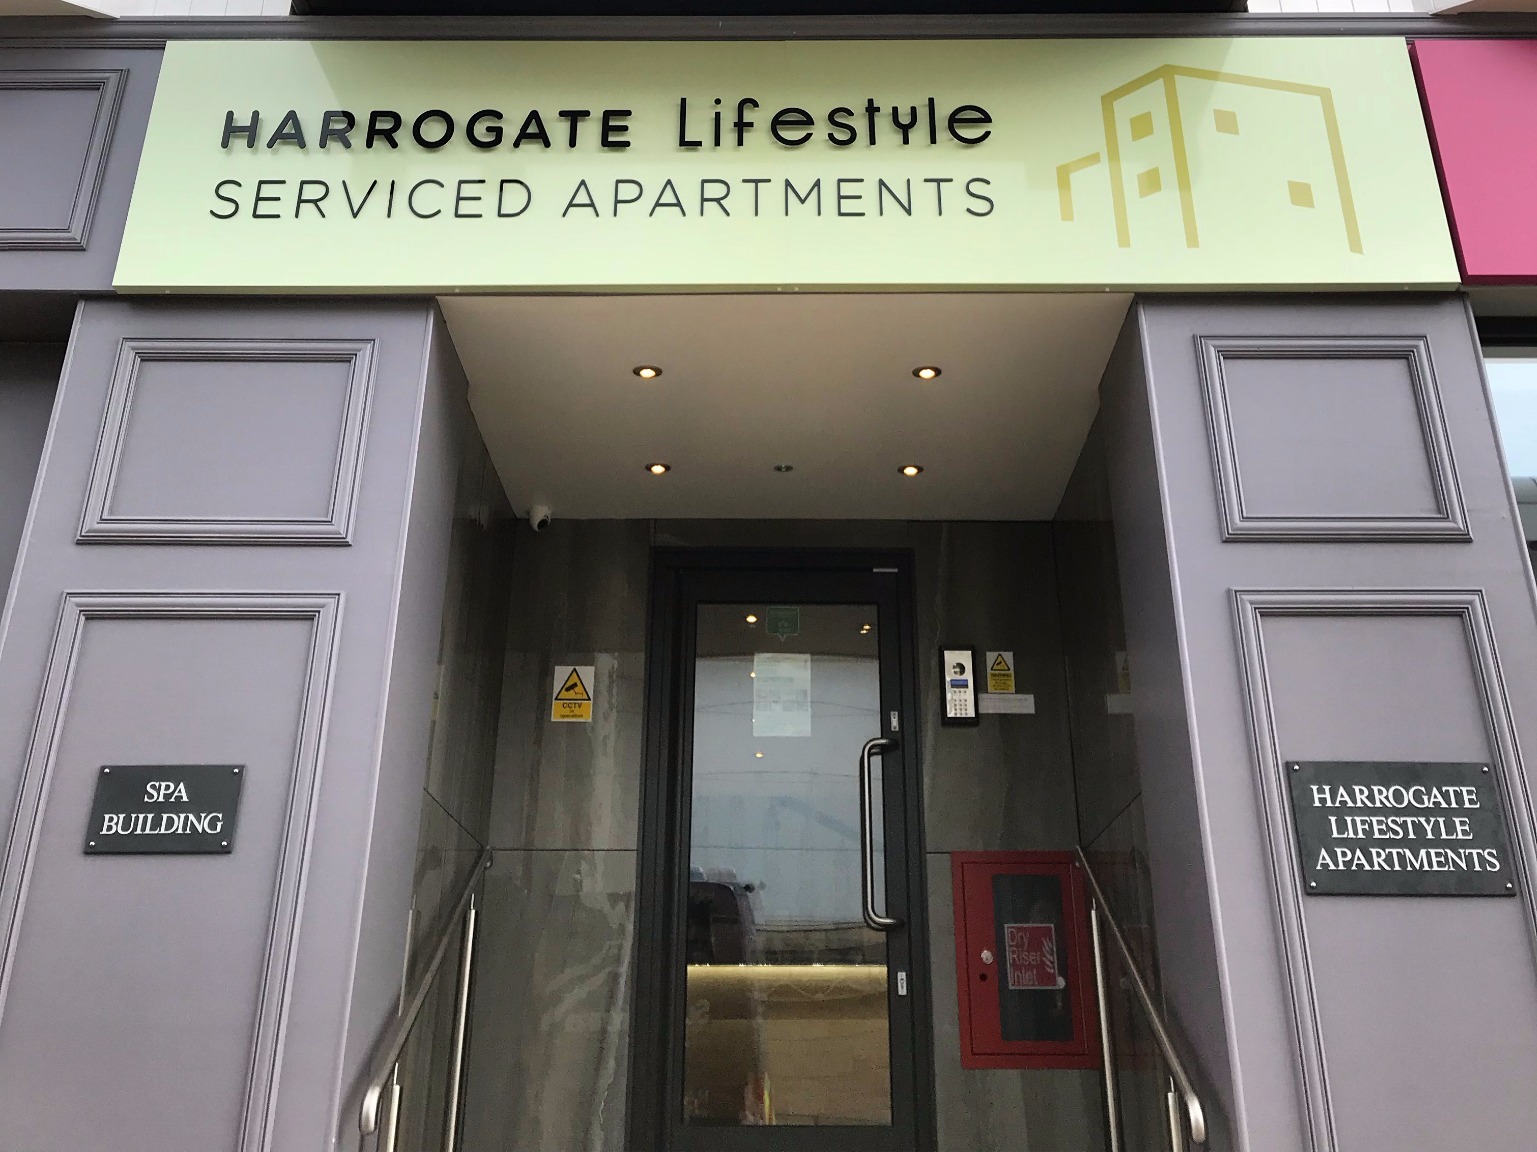 luxury studio apartment harrogate town centre to rent or stay in like a hotel